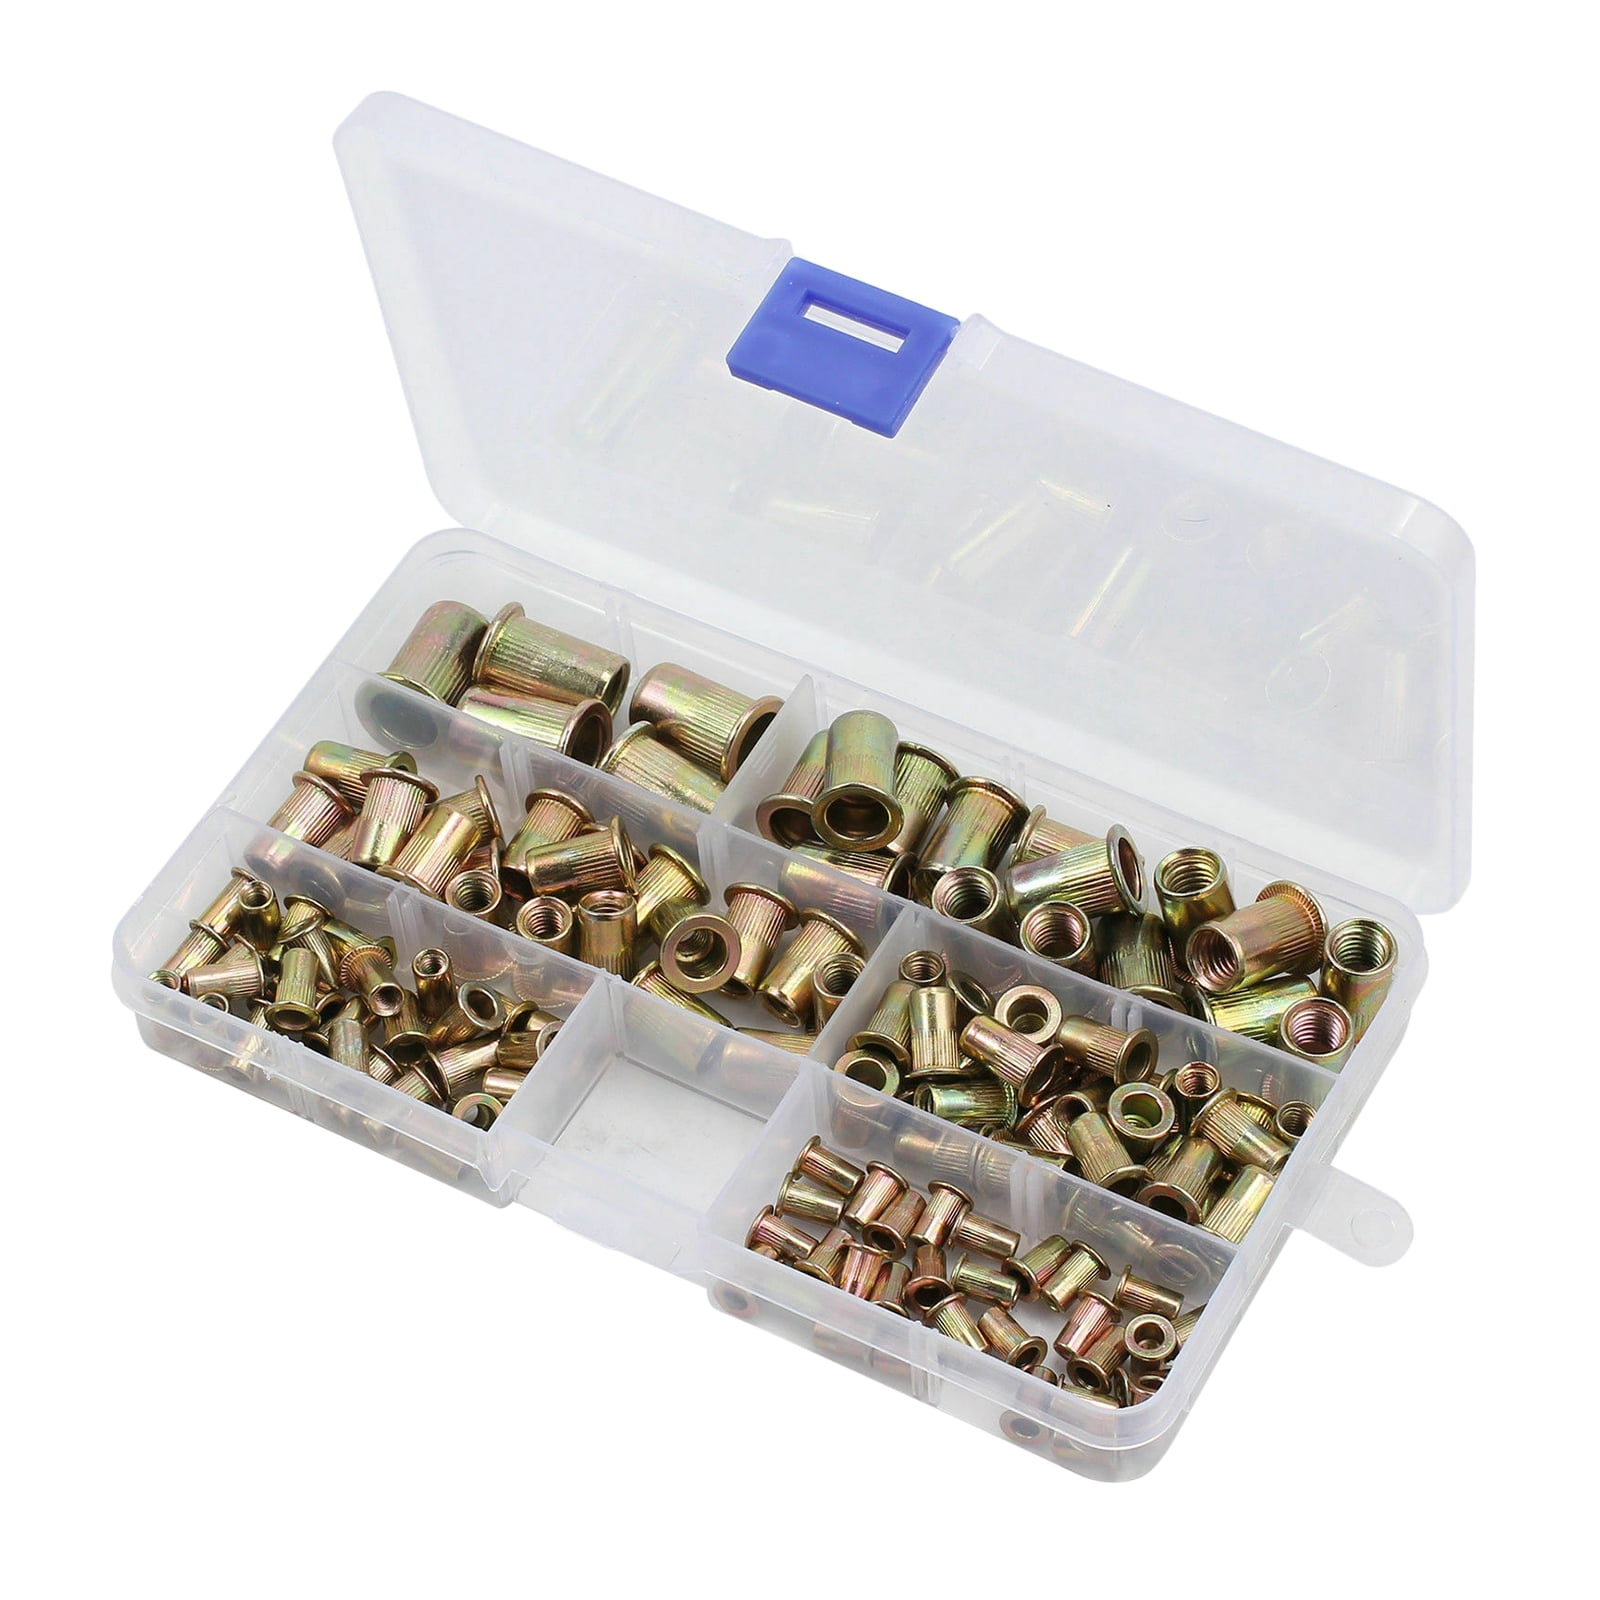 Box Packaging for Furniture Automobiles Color-Plated zinc Rivet Nut M4/5/6/8/10 120pcs Convenient to Carry Pull Riveting Nut